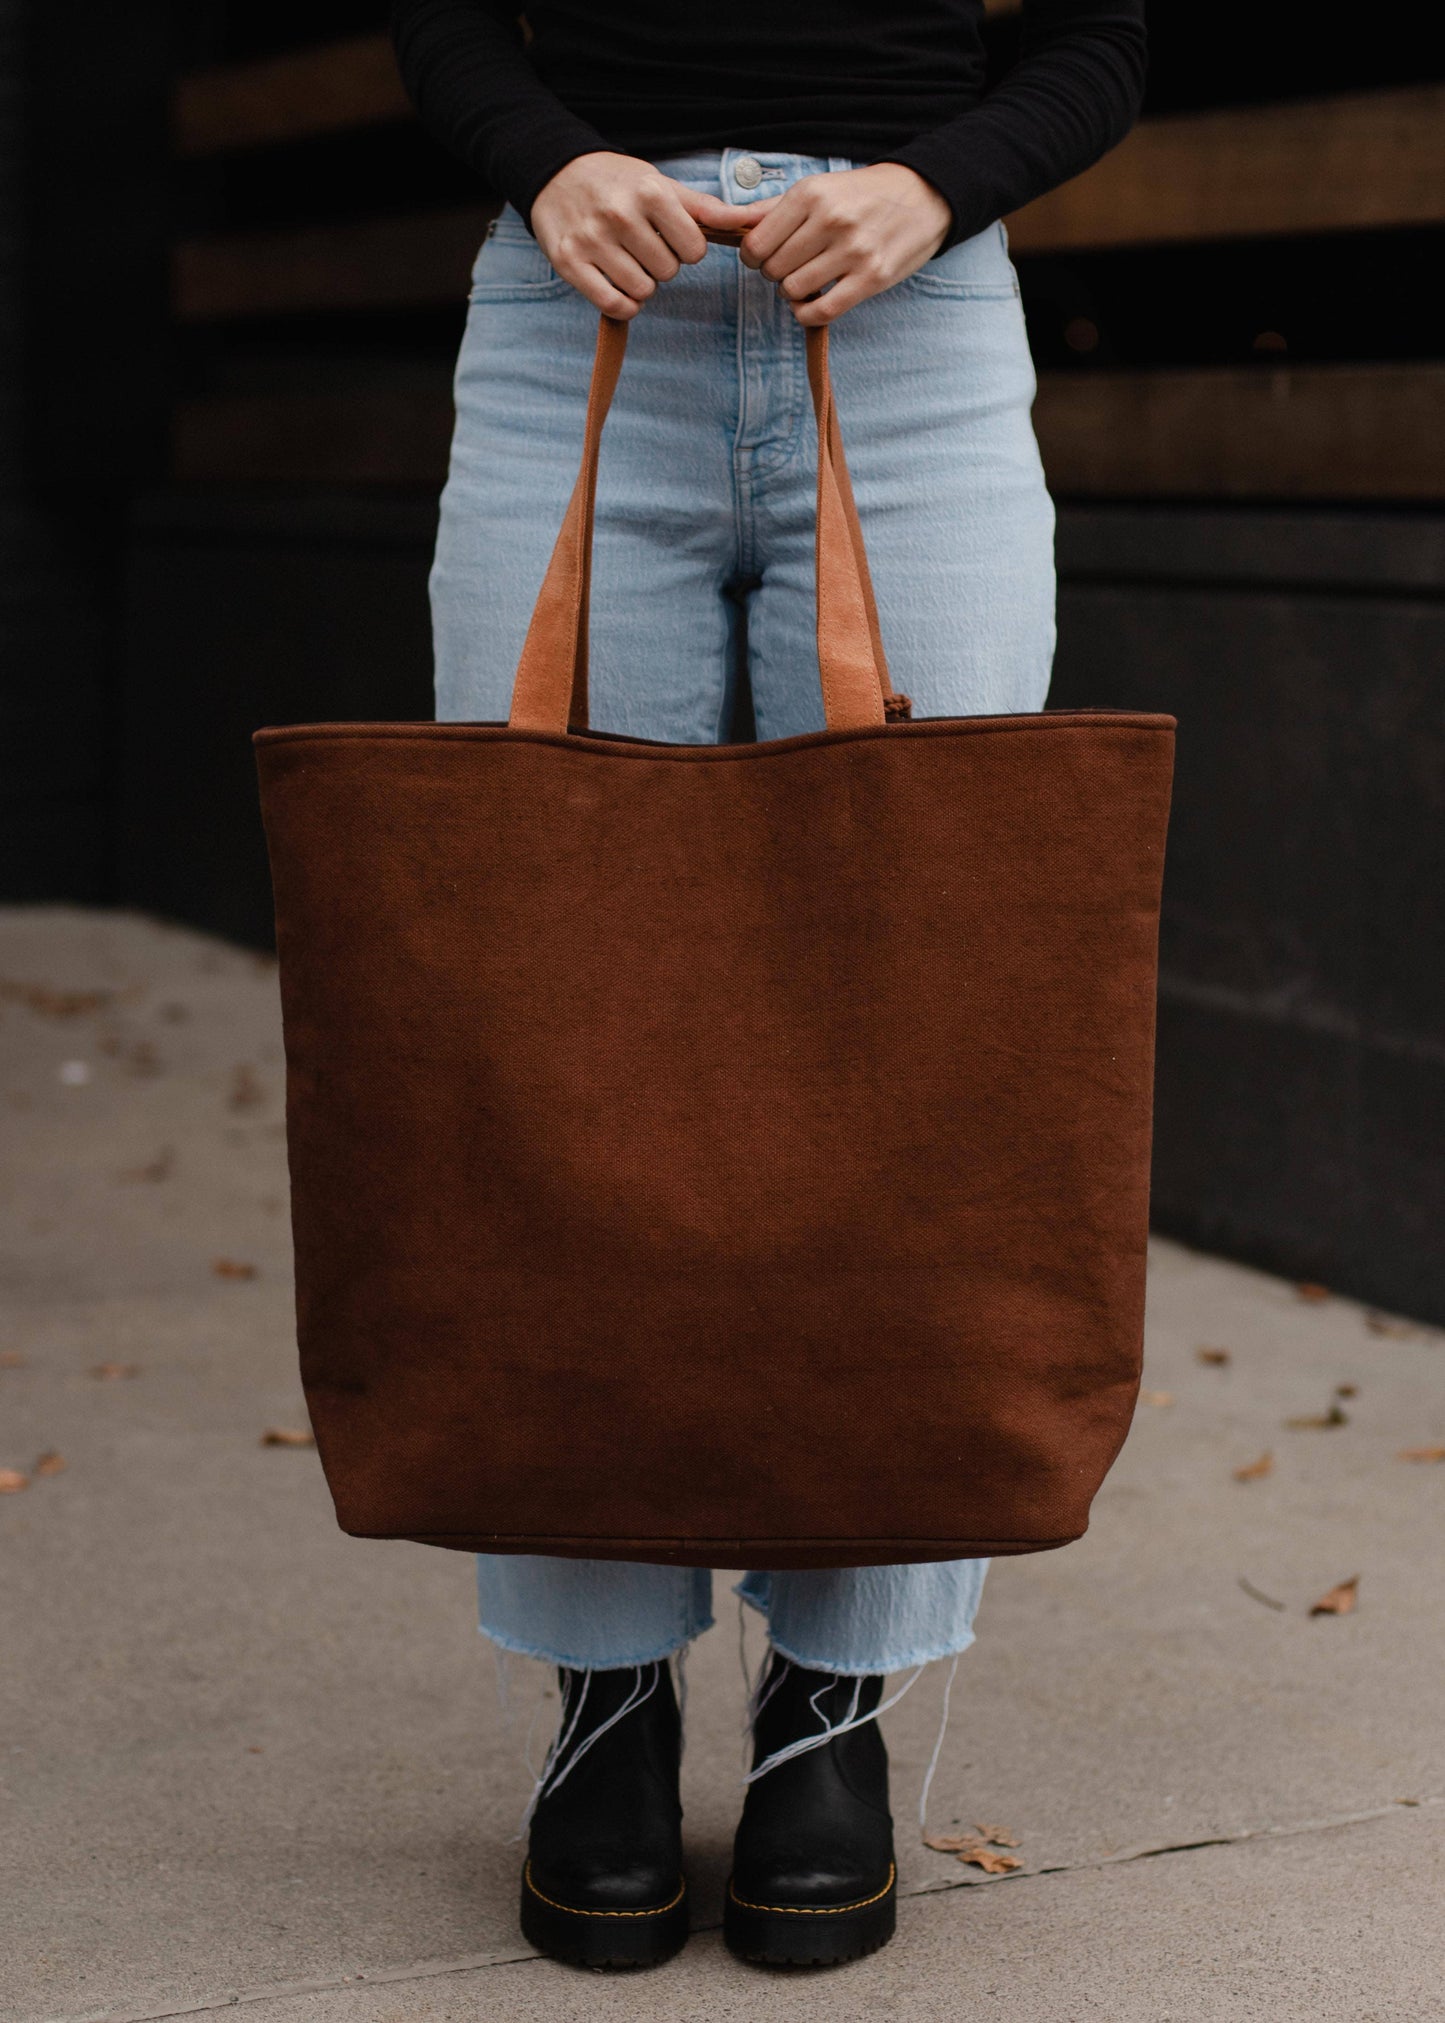 Brown Whiskey Weather Tote